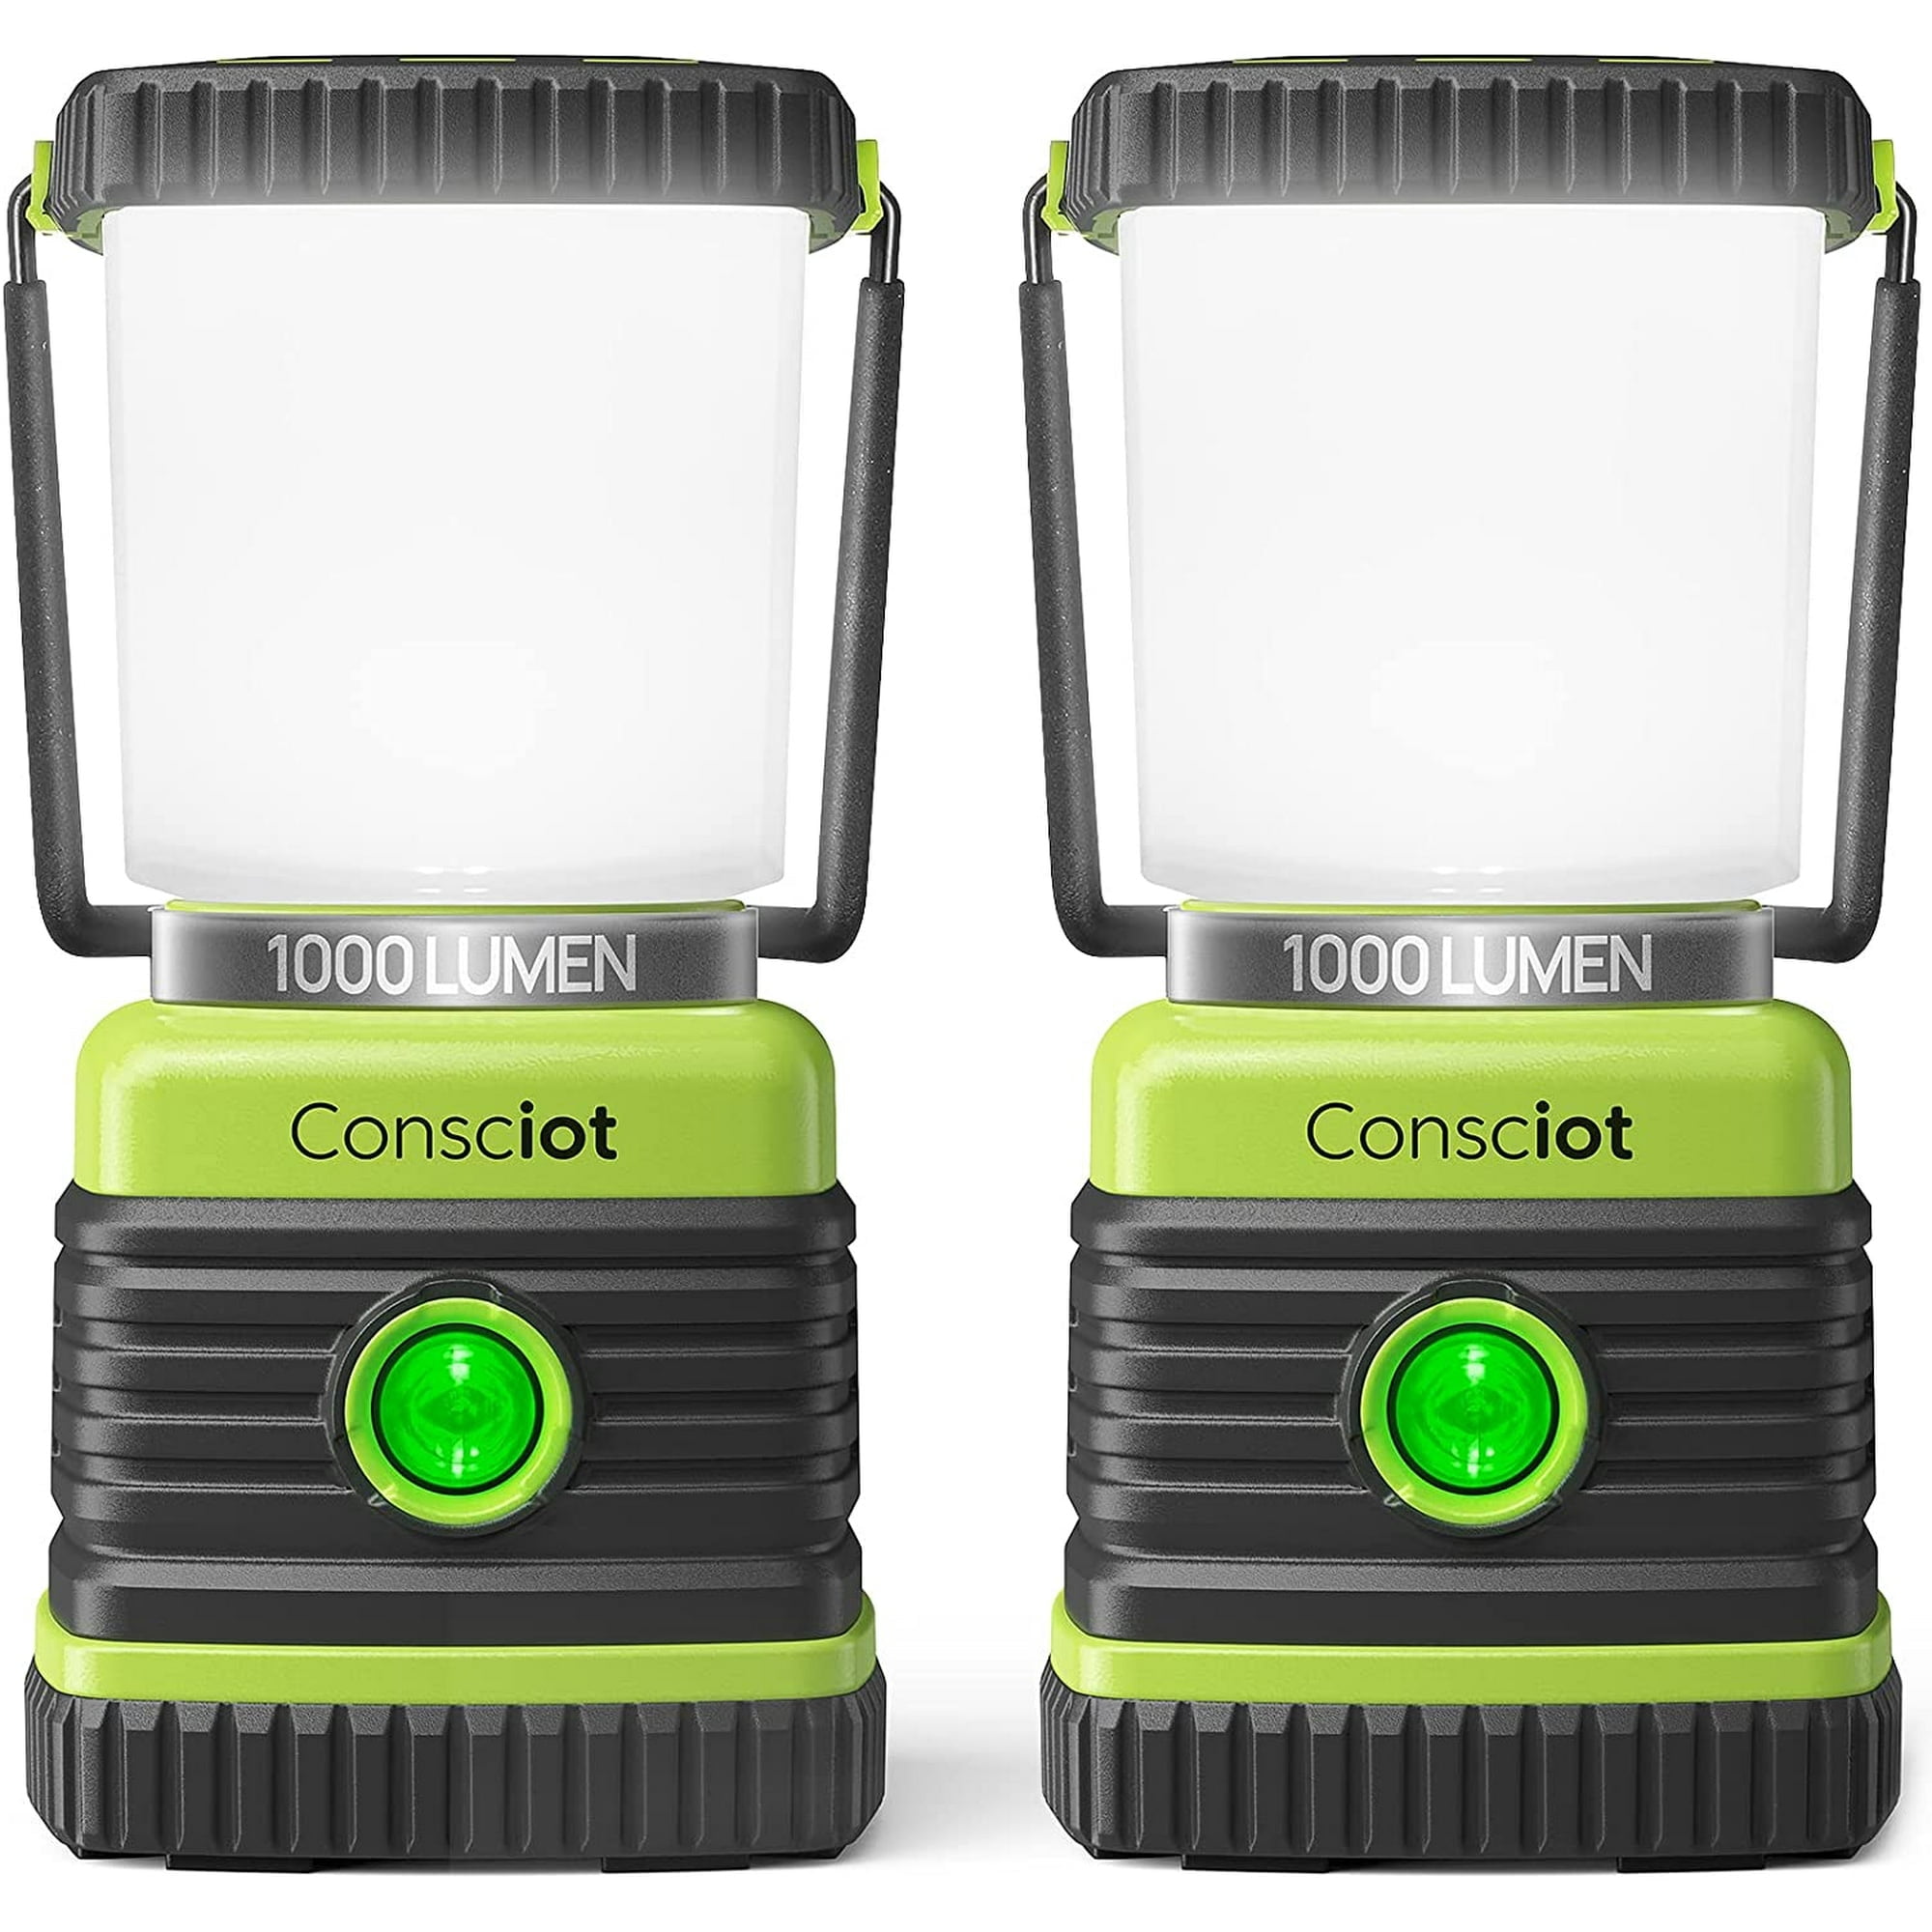 Brightest LED Camping Lantern, 140LM, Battery Powered, 4 Light